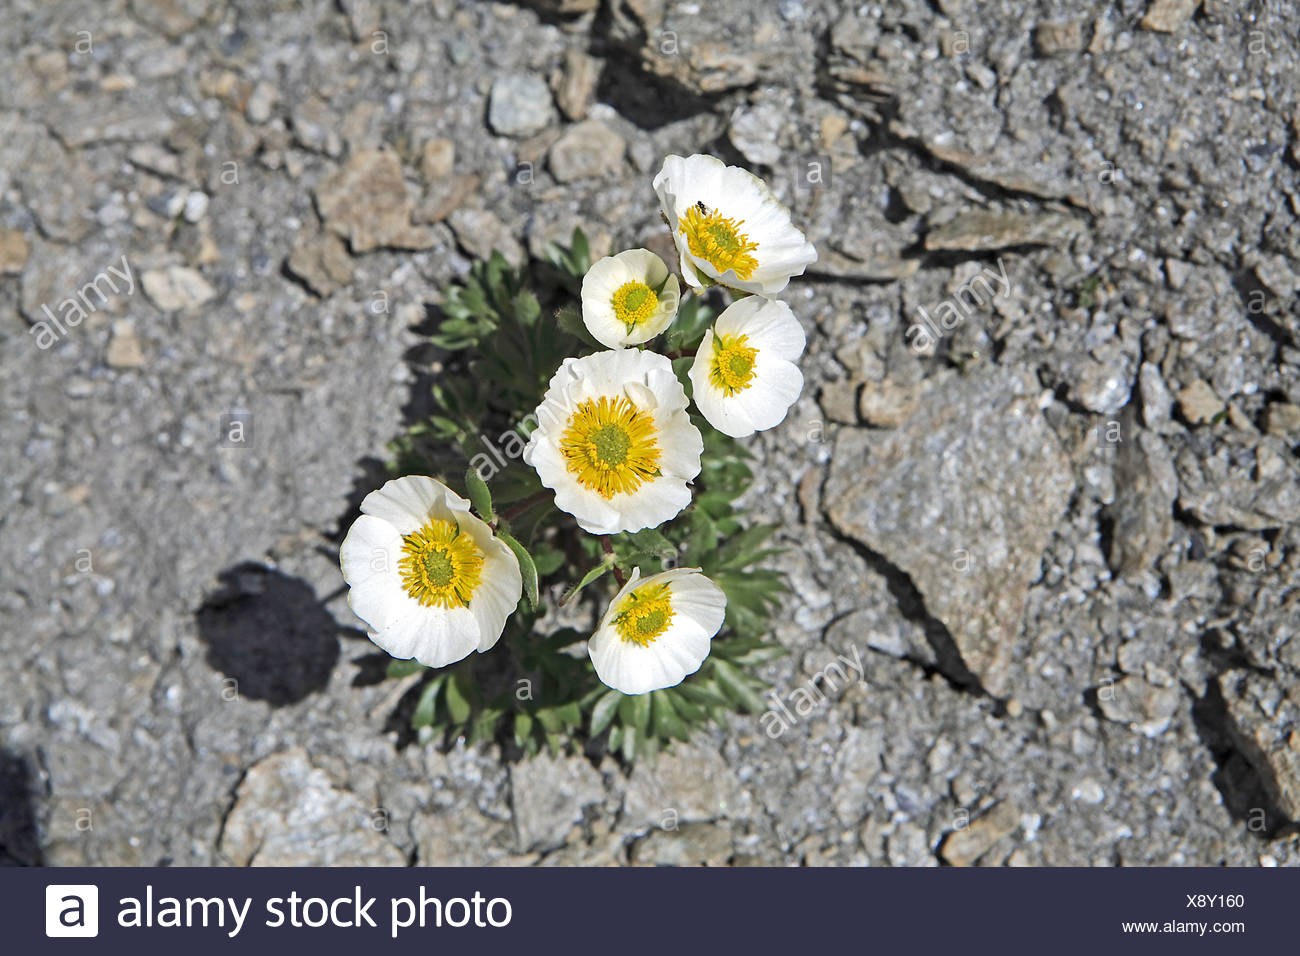 Italy Cuneo Colle dell'Agnello 2740 ms Ranunculus glacialis glacier  crowfoot plant mountain flower knows yellow stones Stock Photo - Alamy